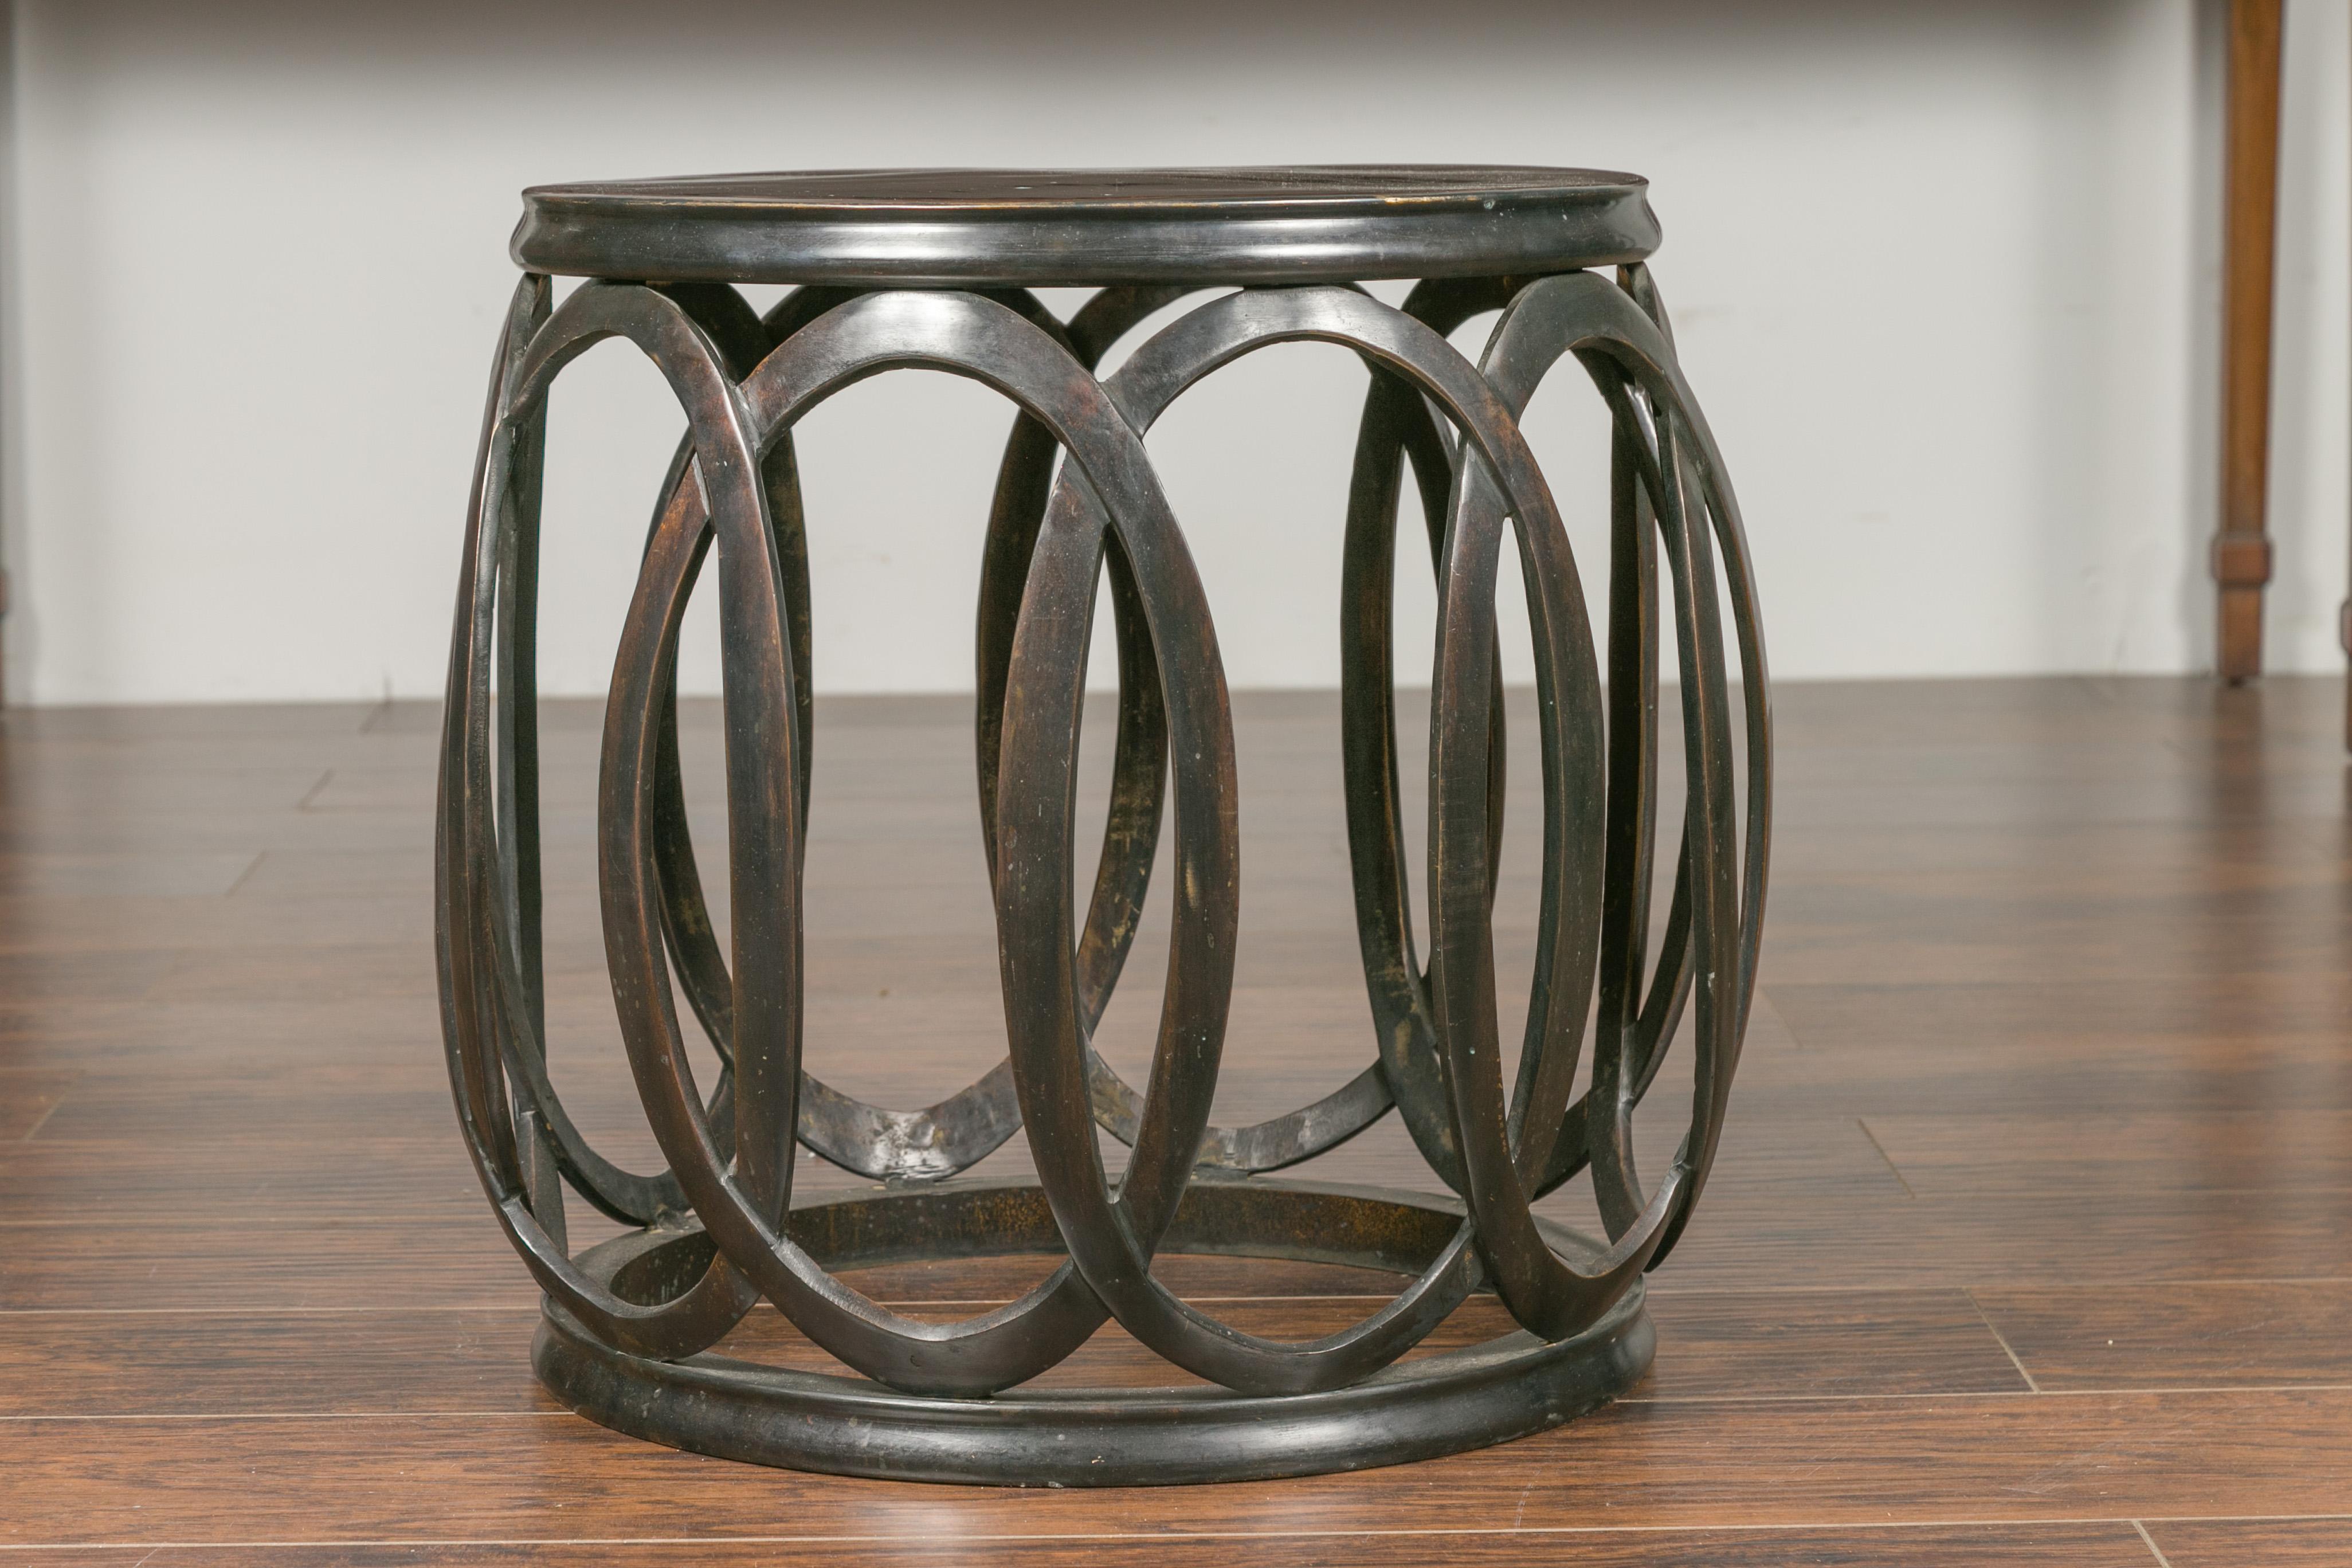 A French vintage bronze drum drinks table from the mid-20th century with intertwining oval motifs. Born in France during the midcentury period, this bronze drum table features a circular top sitting above an interesting base presenting intertwining